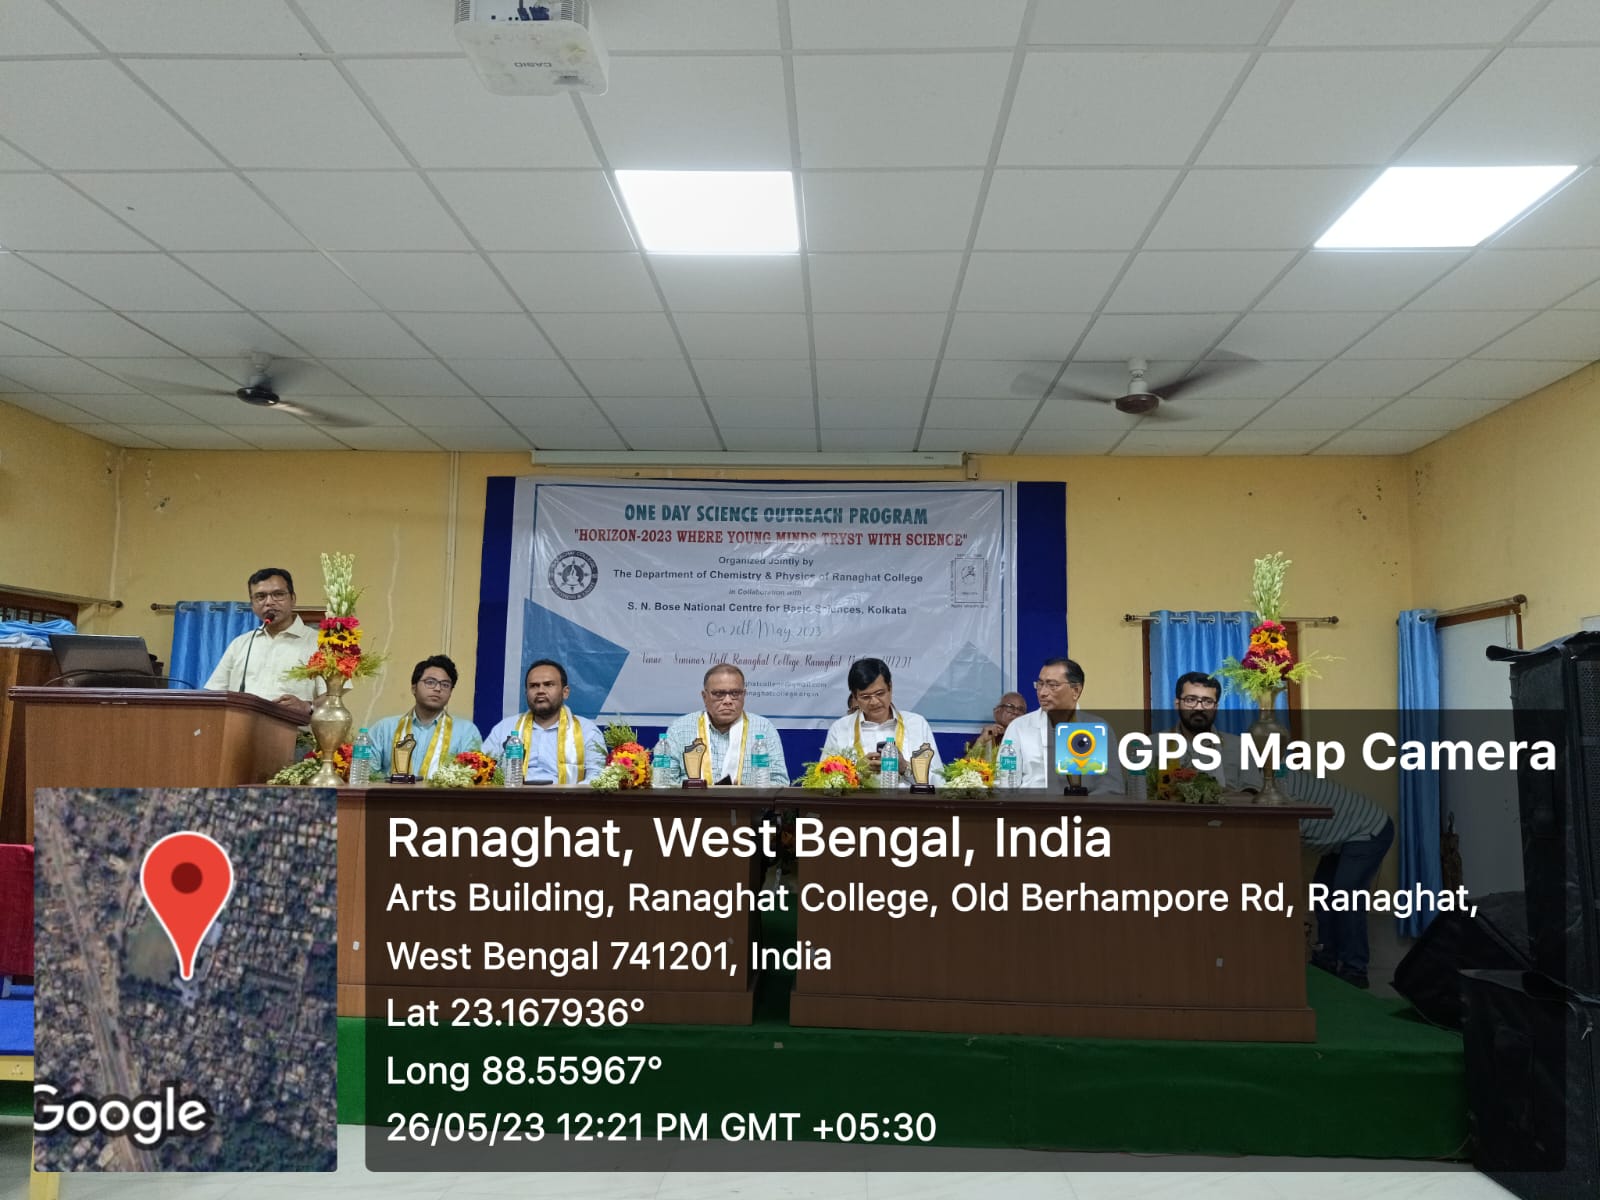 A One Day Science Outreach Program Horizon-23 Where Young Minds Tryst With Science at Ranaghat College, WB